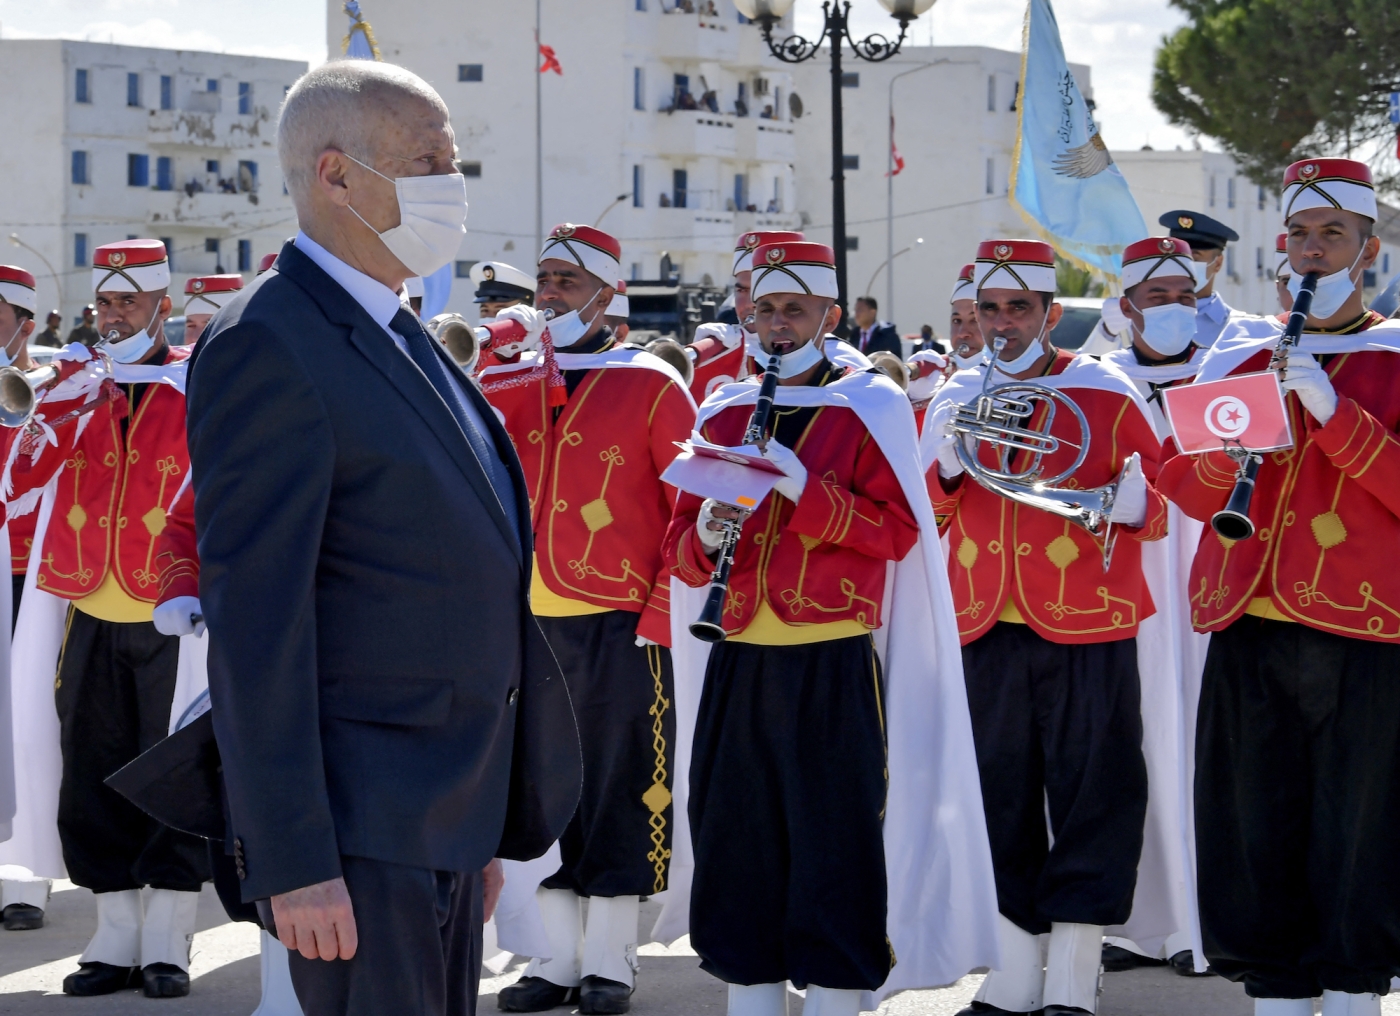 Tunisian President Kais Saied reviews honour guards at an Evaculation Day commemoration ceremony in the northern town of Bizerte on 15 October 2021 (AFP)